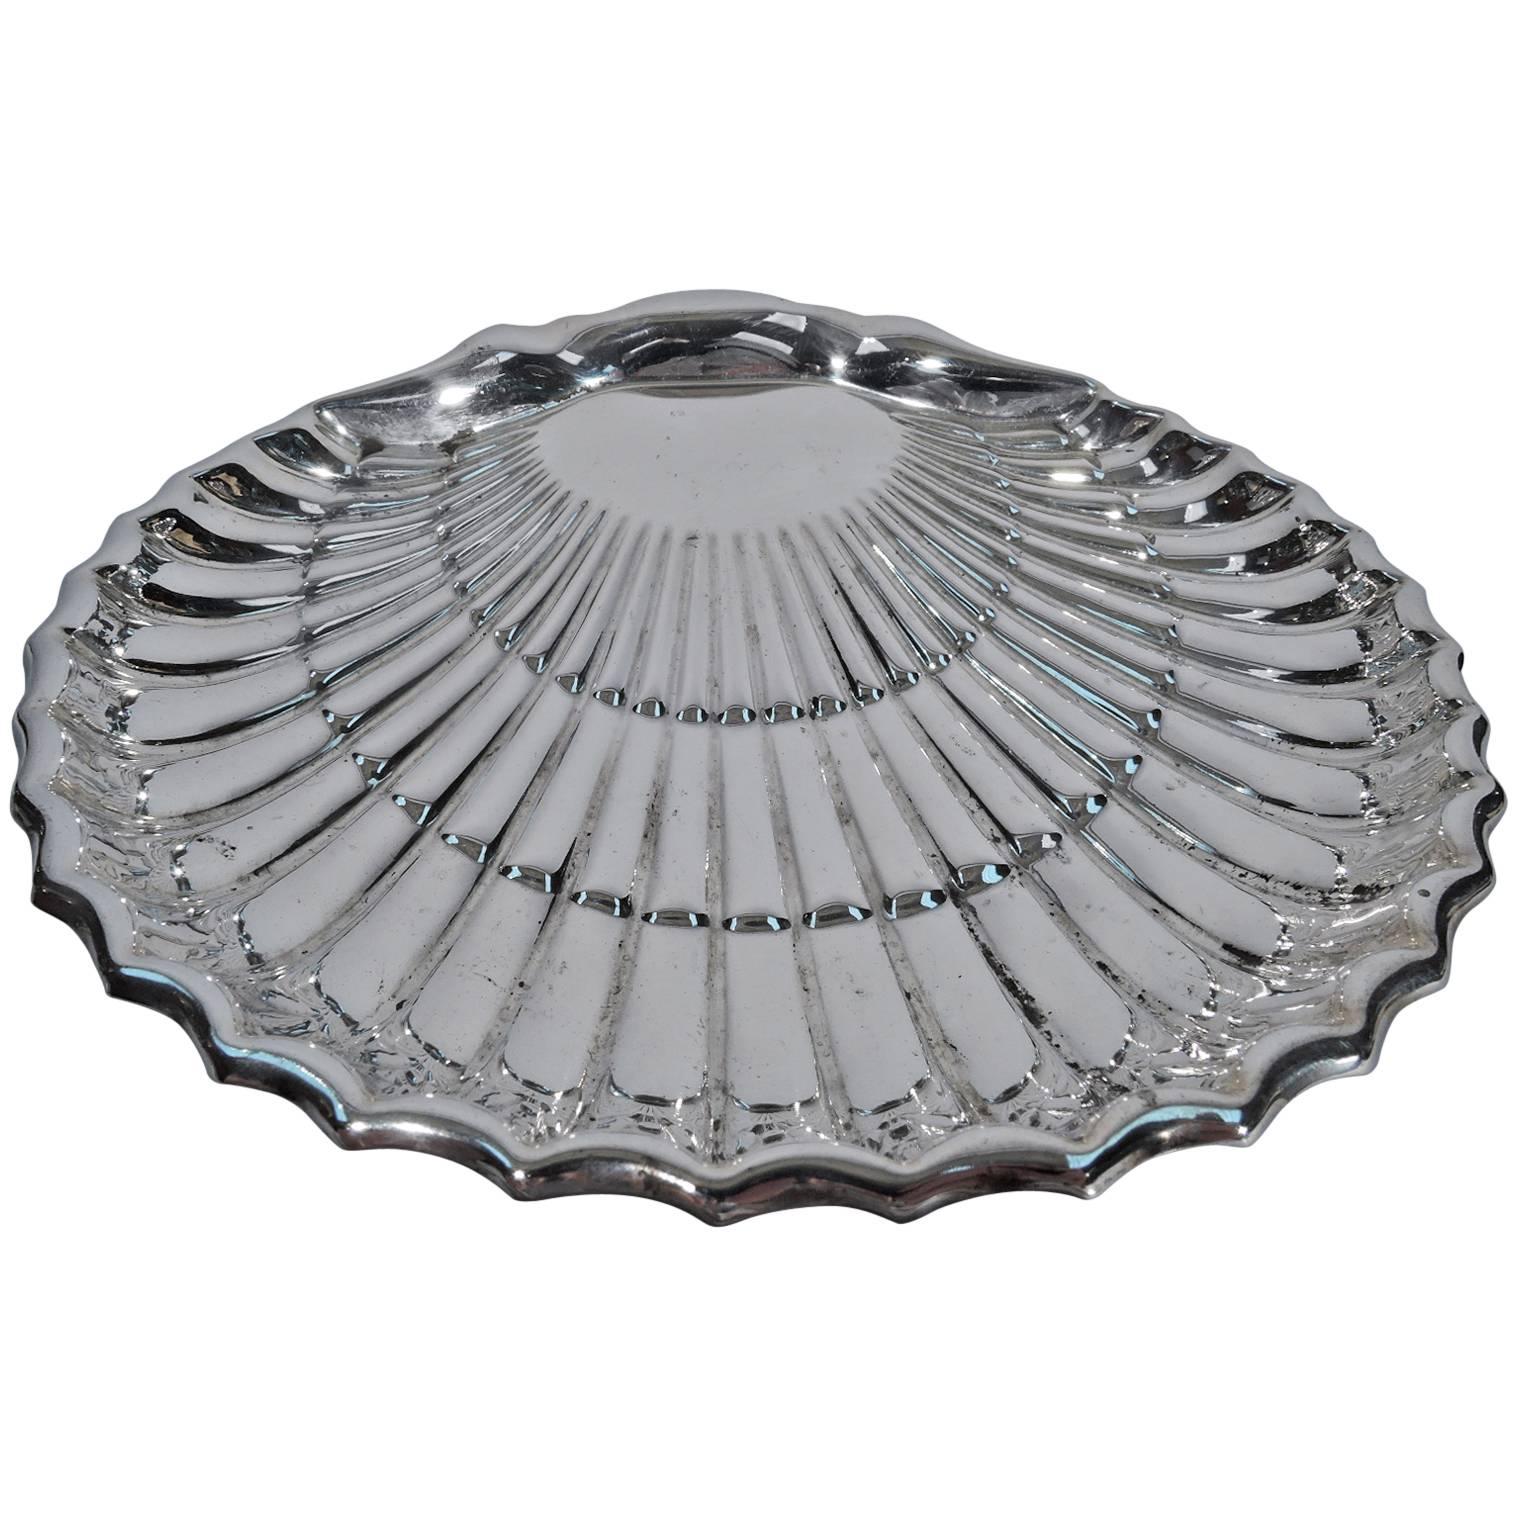 American Sterling Silver Scallop Shell Bowl